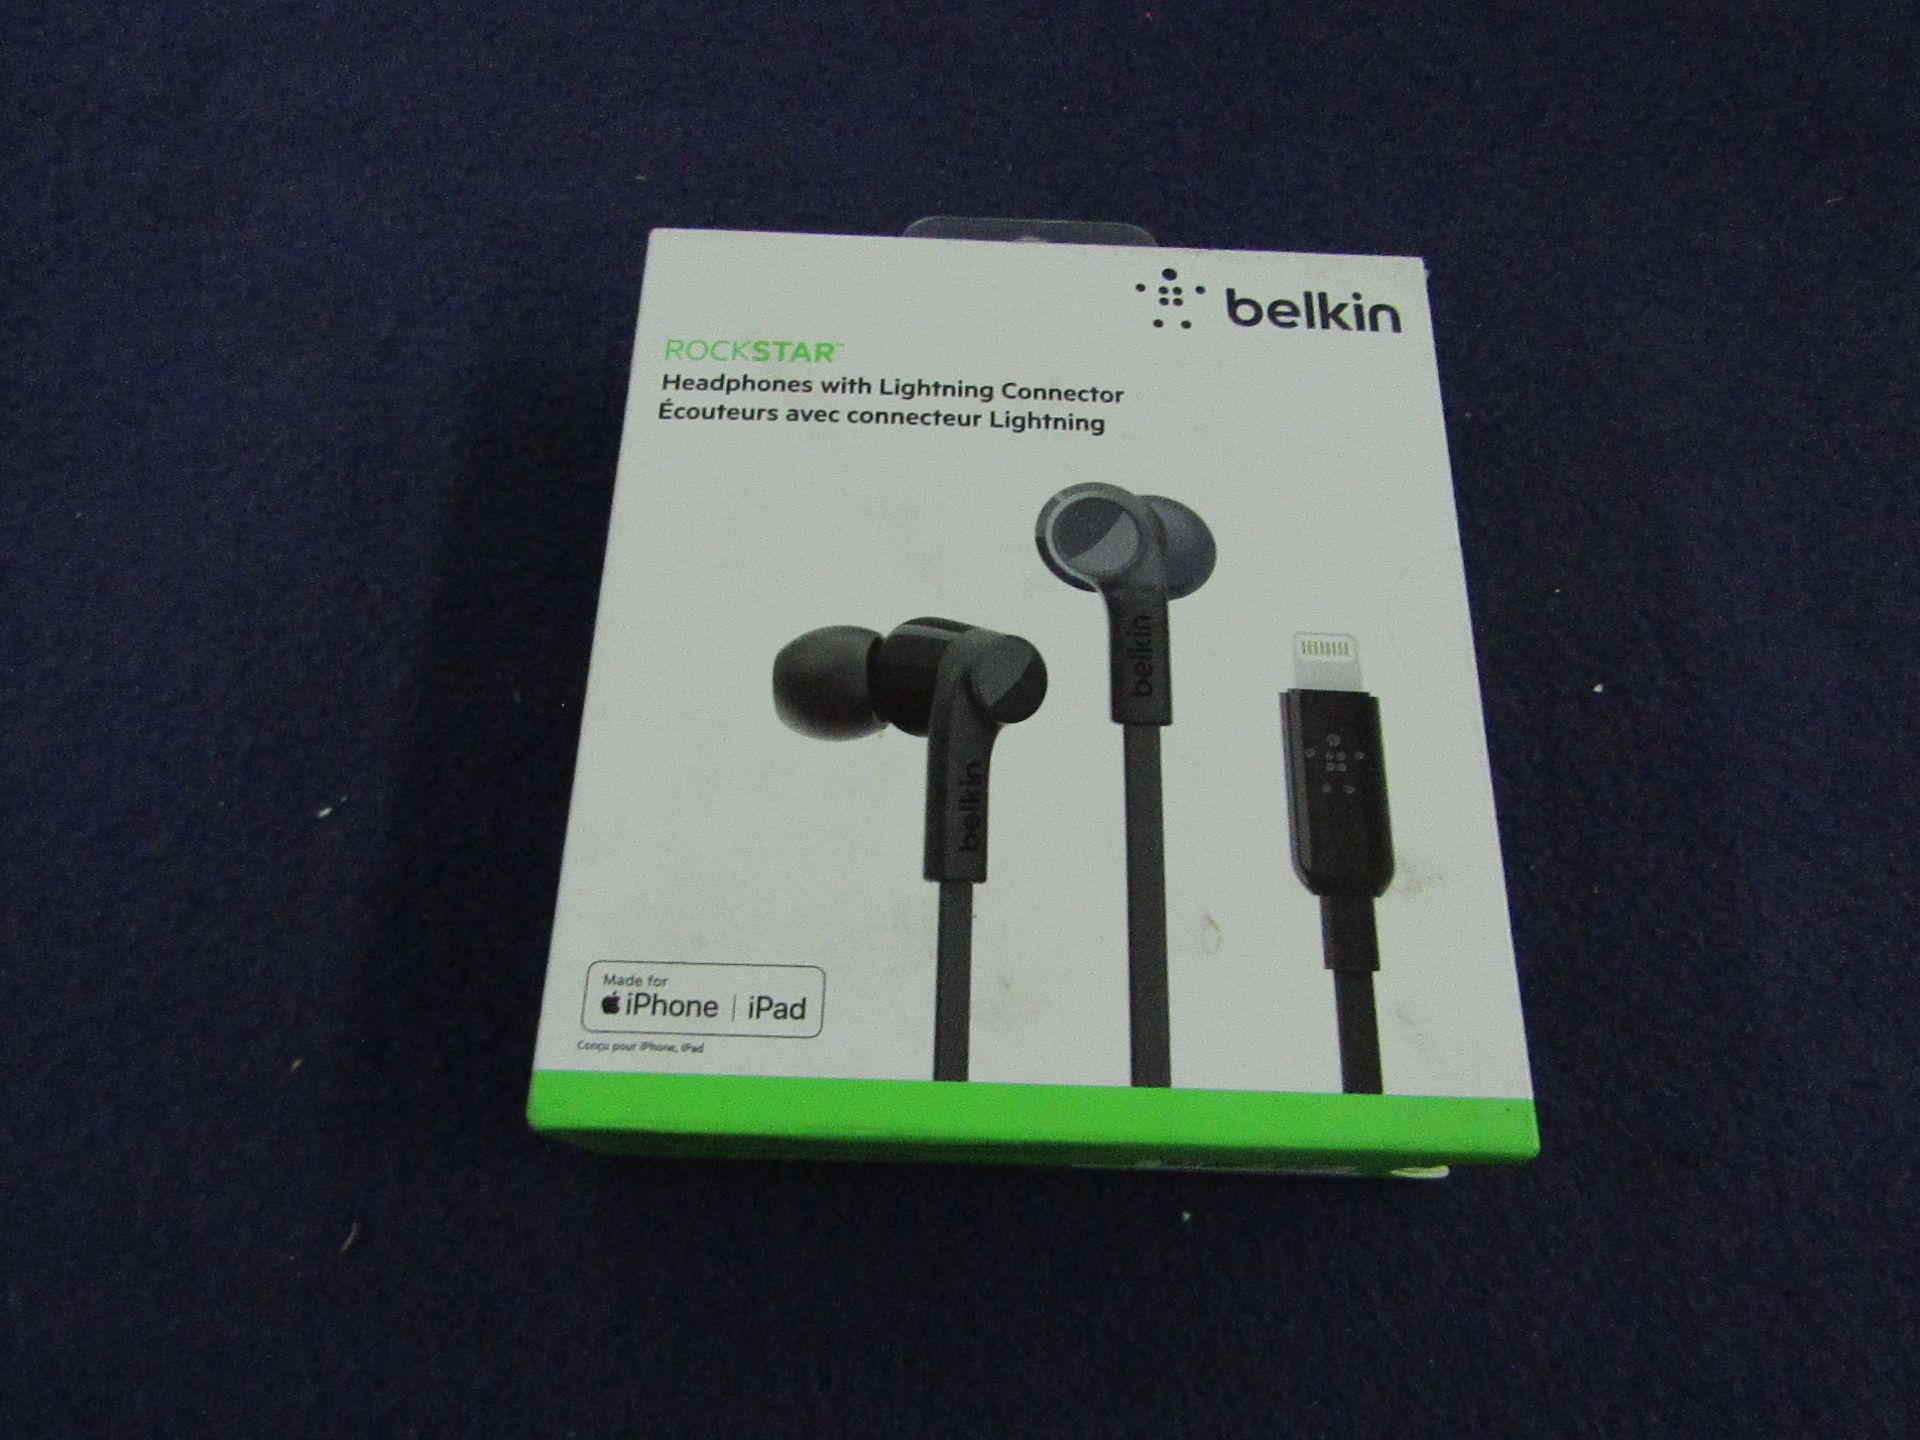 Belkin - Rockstar Headphones With Lightning Connector - Black ( Apple Devices ) - Untested & Boxed.